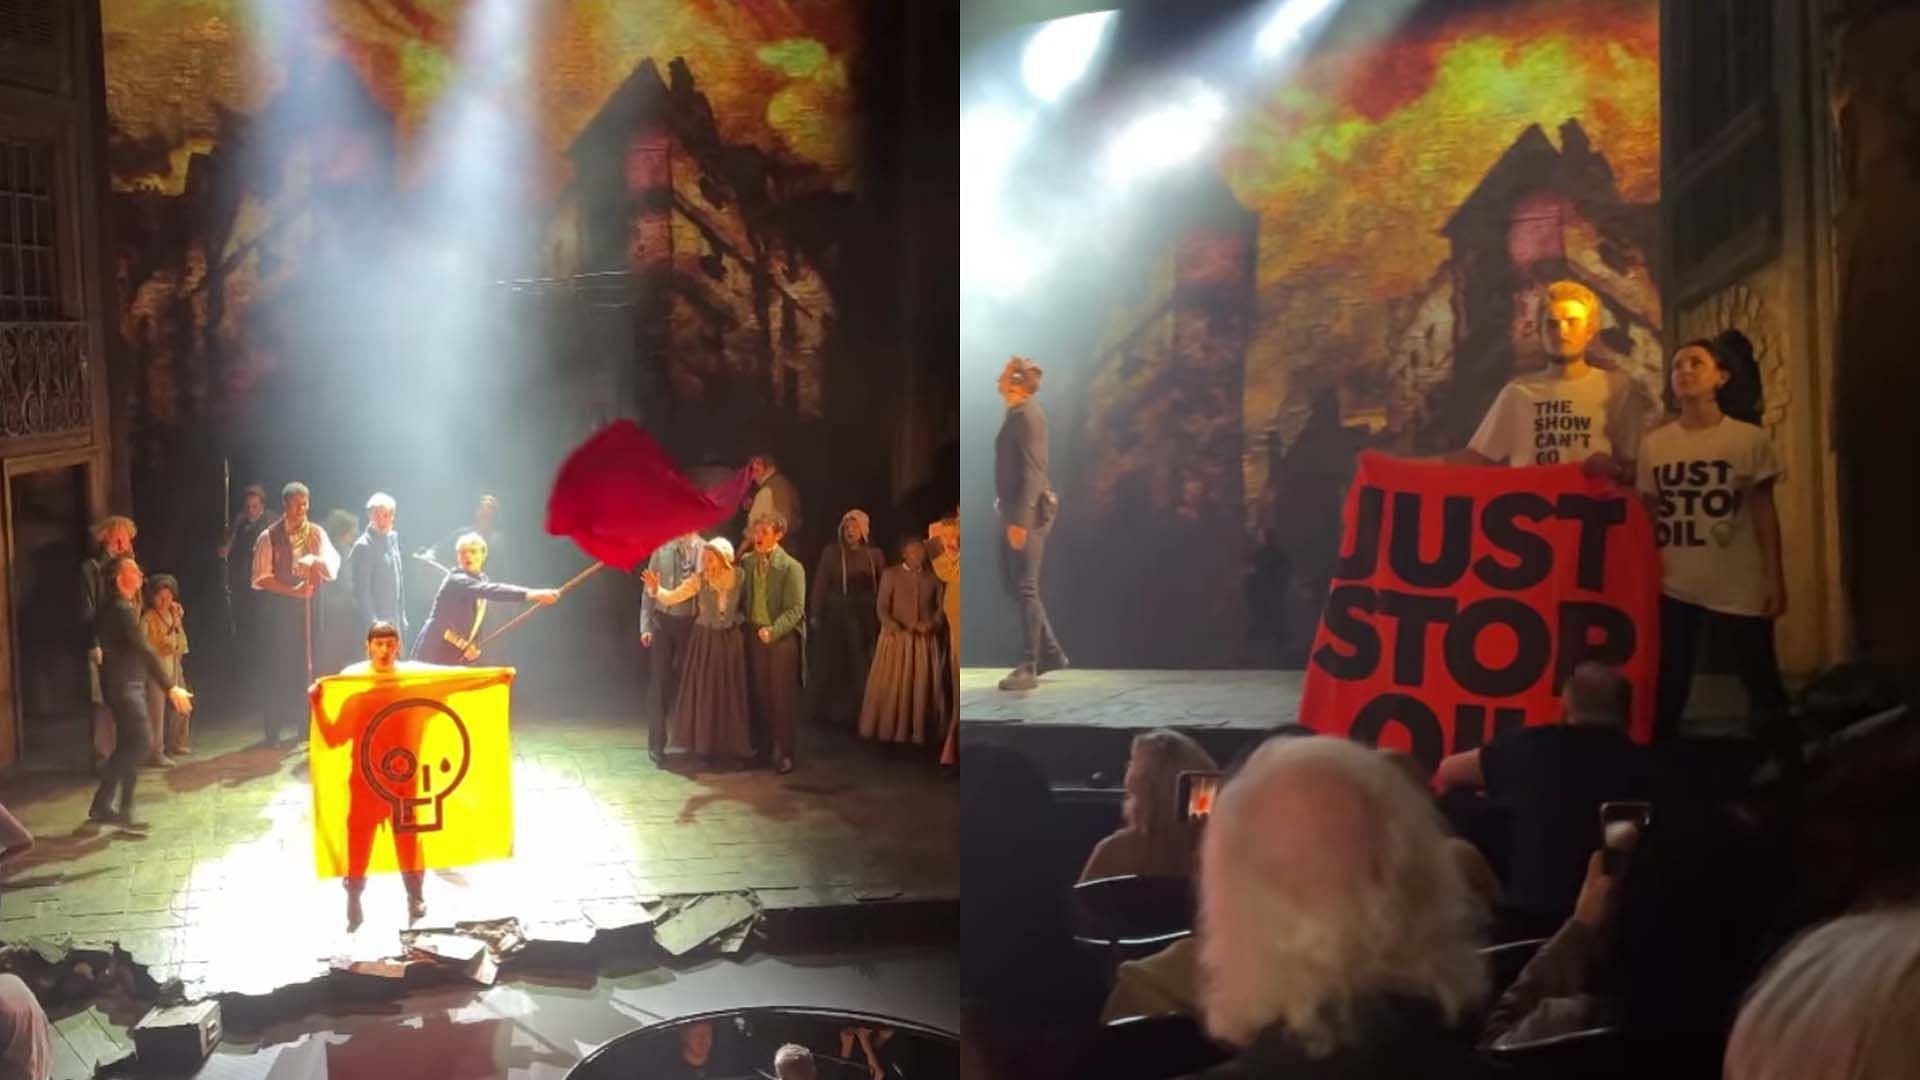 Just Stop Oil activists arrested for disrupting a Les Mis&eacute;rables production (Image via Instagram/@Just.stopoil)